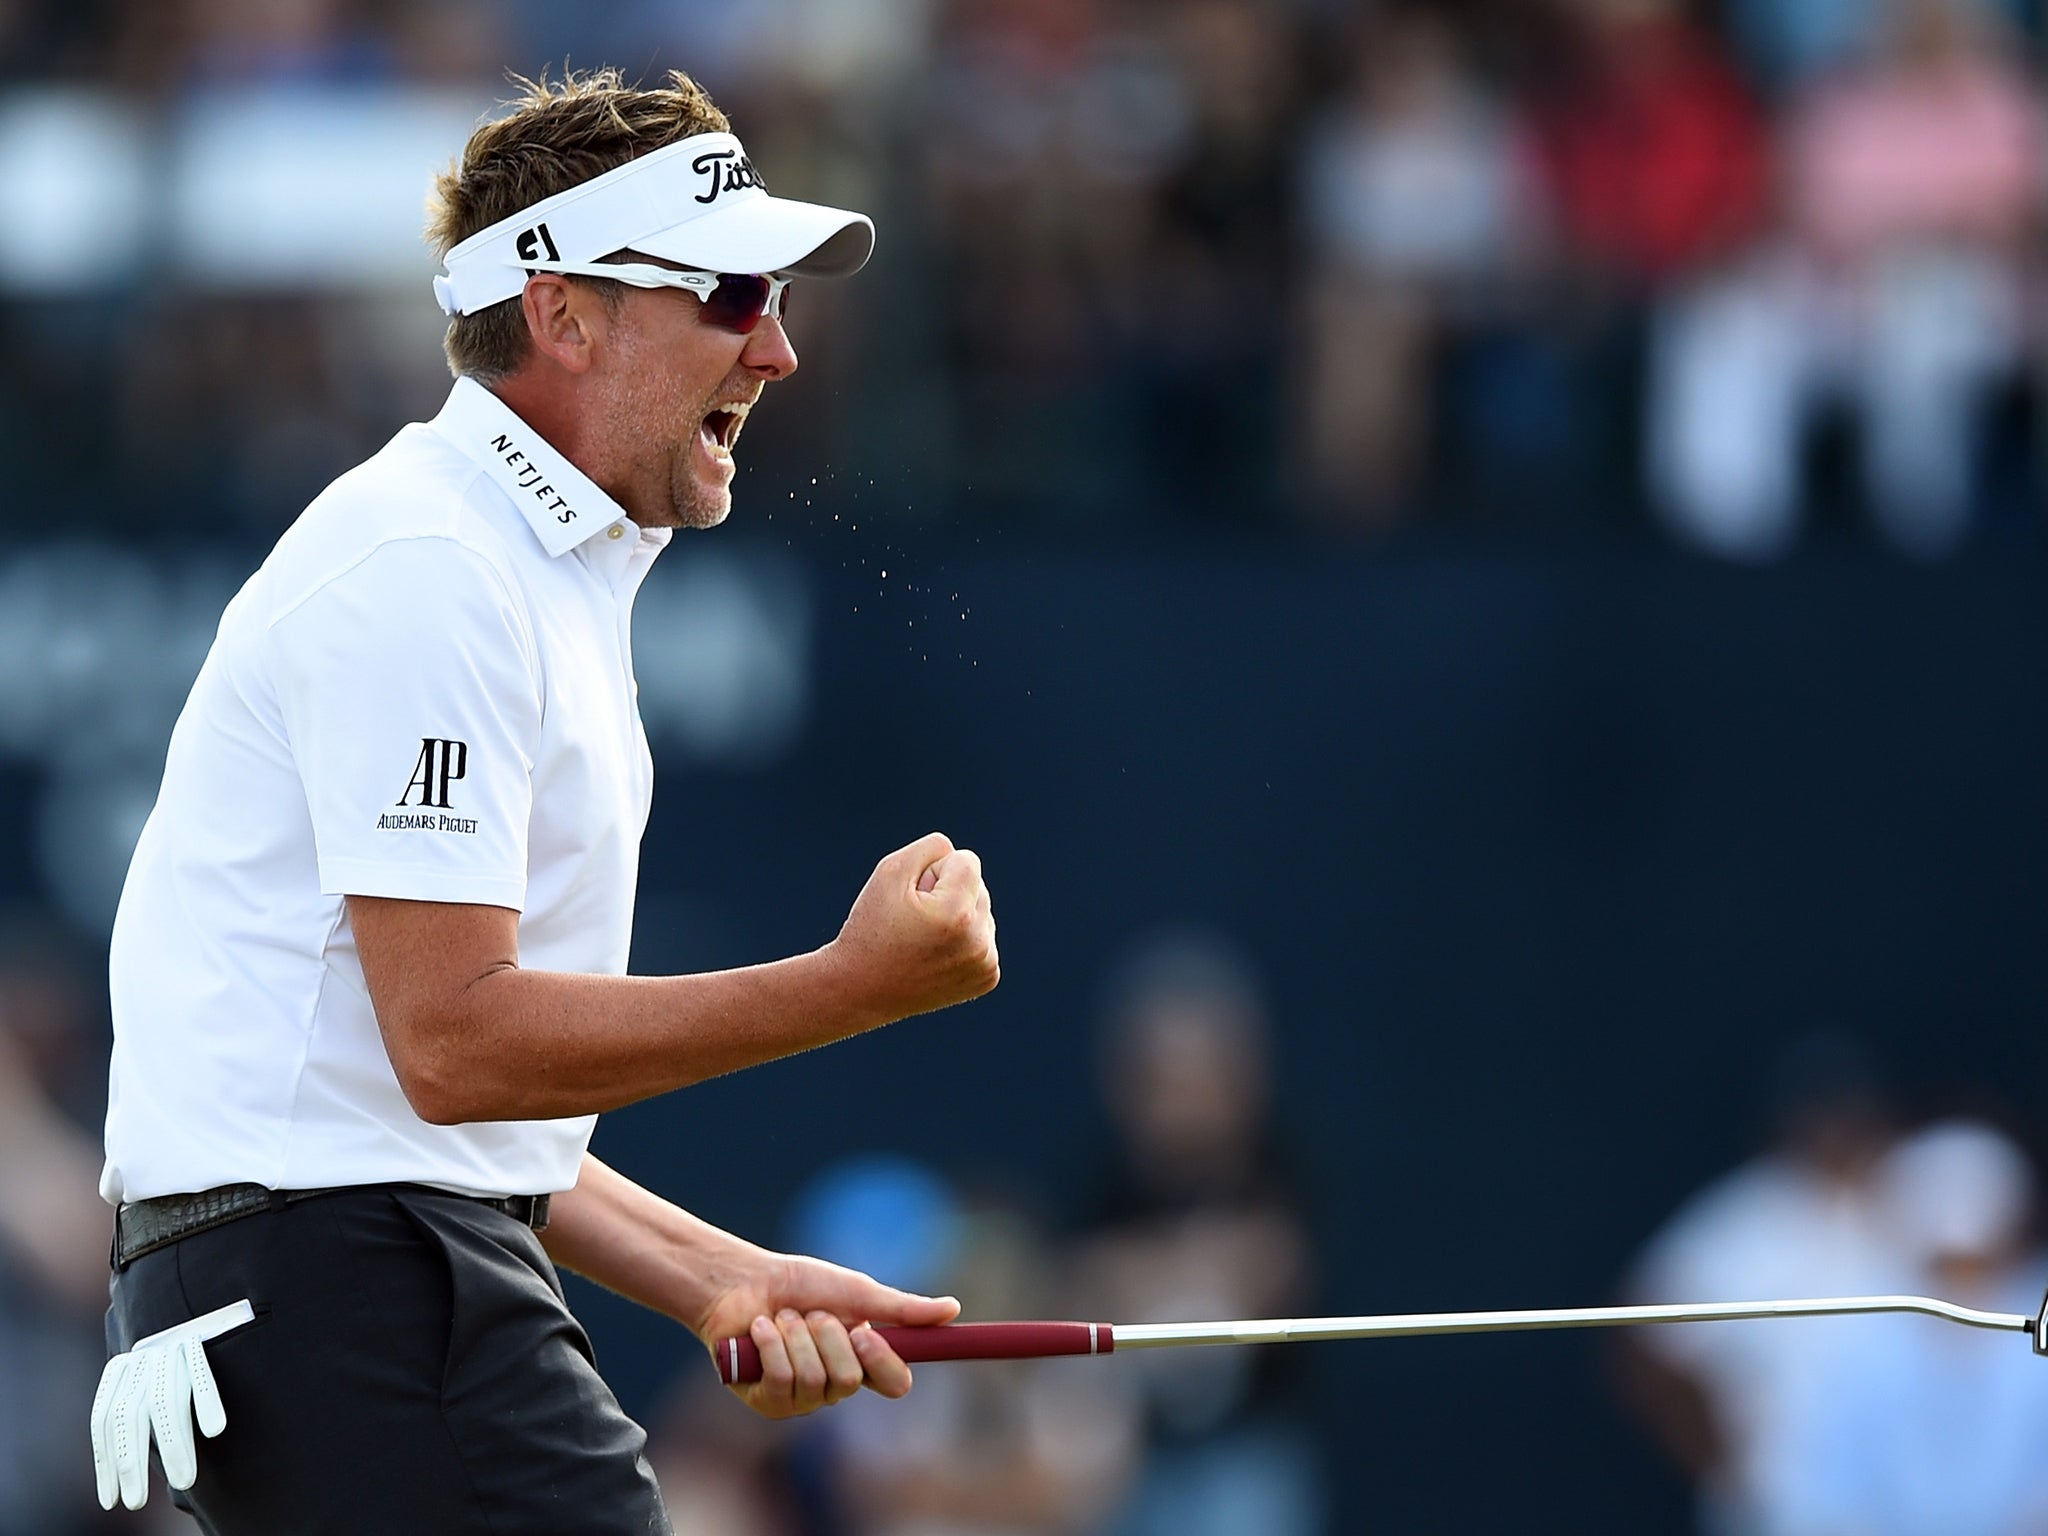 Ian Poulter only qualified for the Masters last weekend